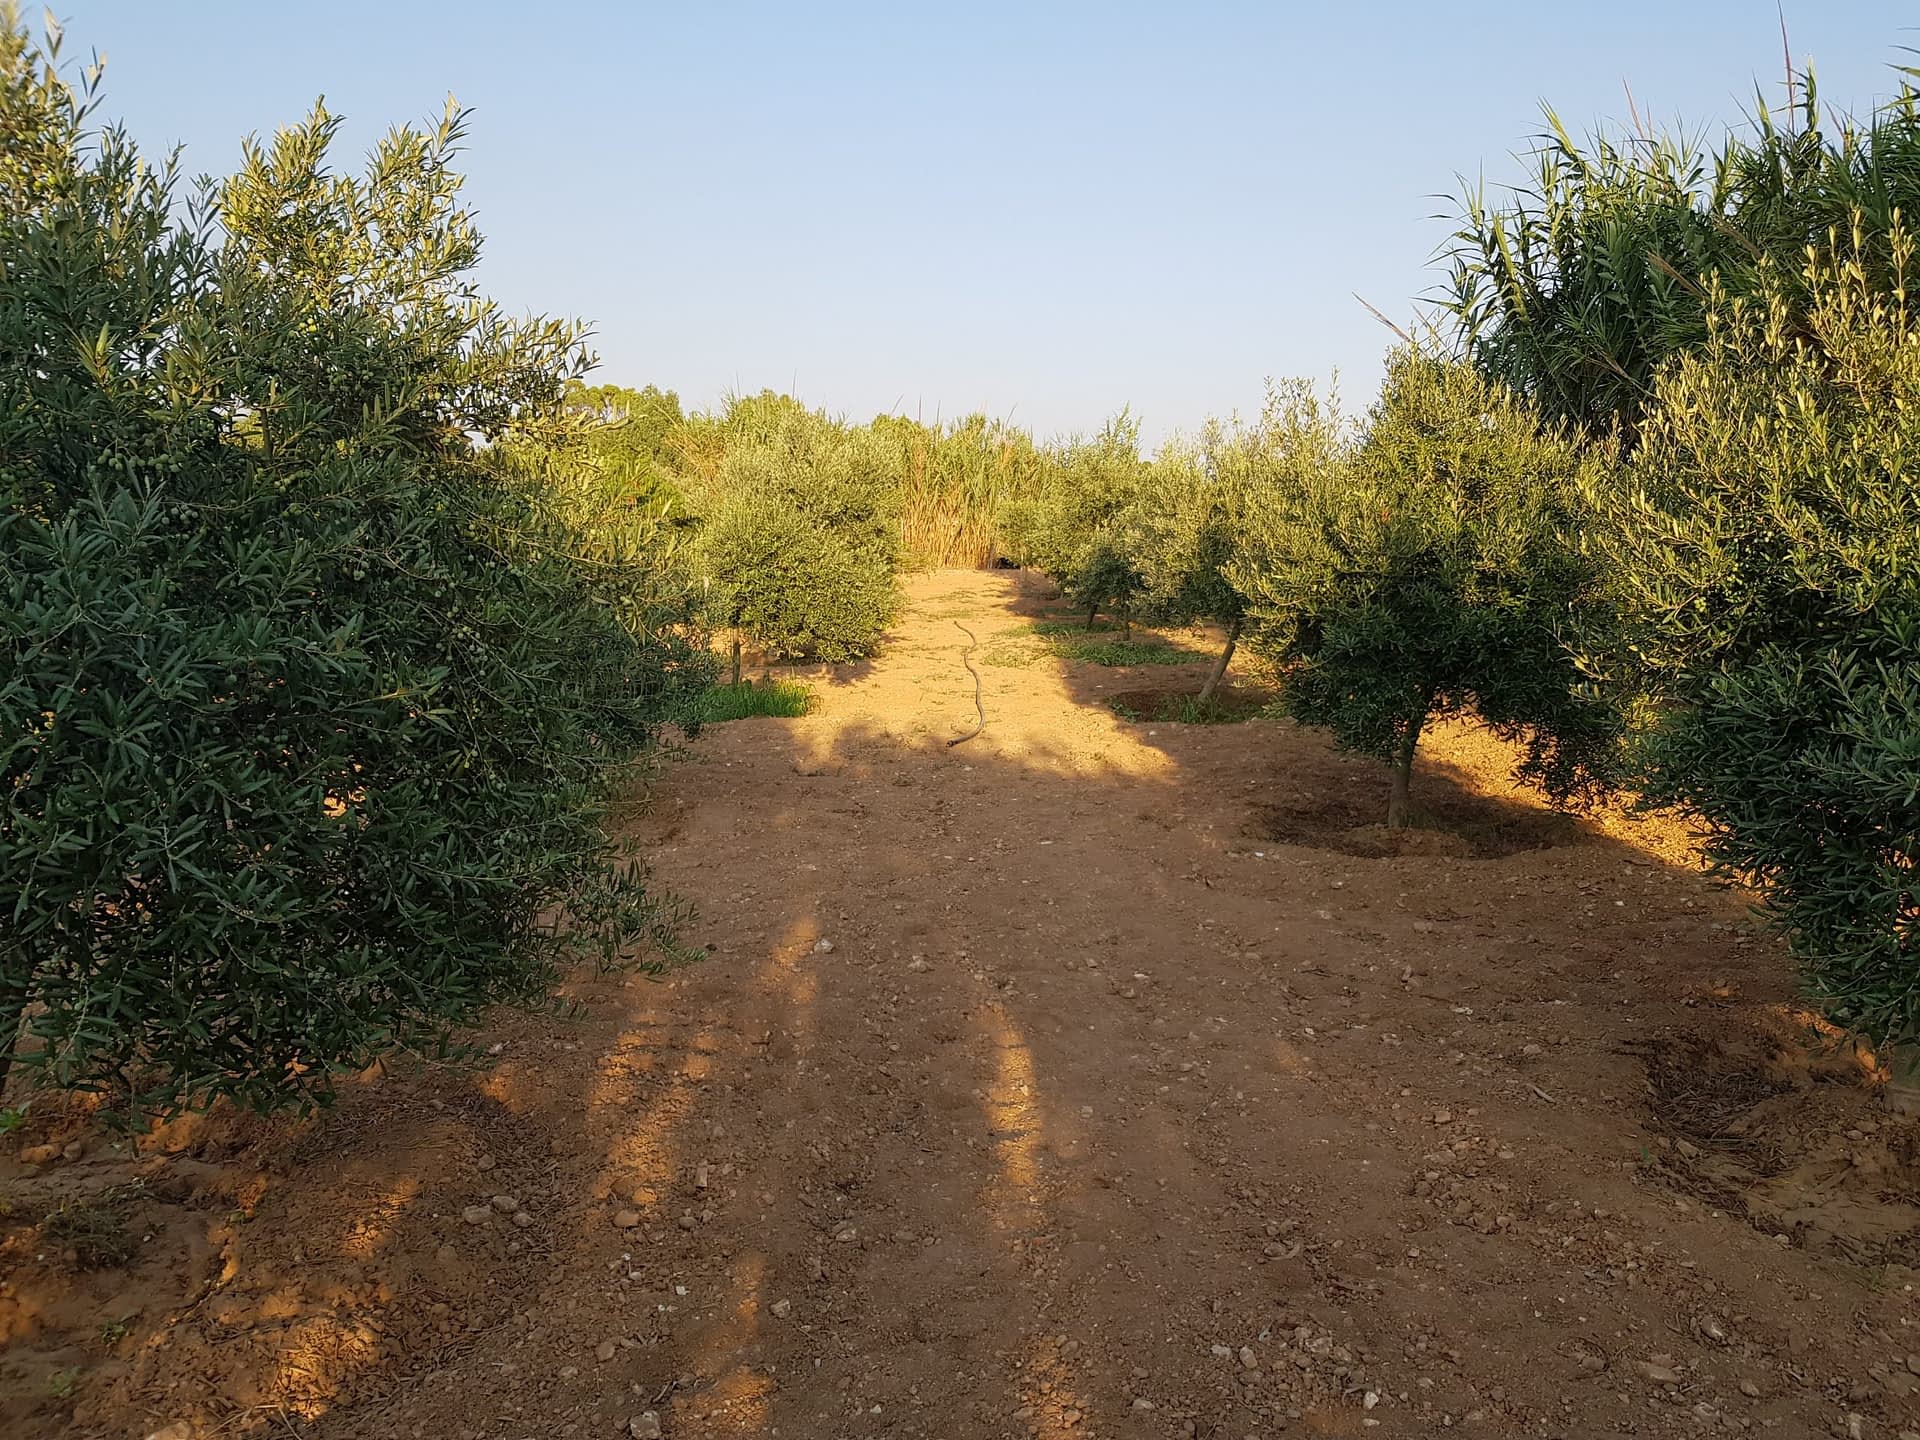 production-business-europe-olive-oil-times